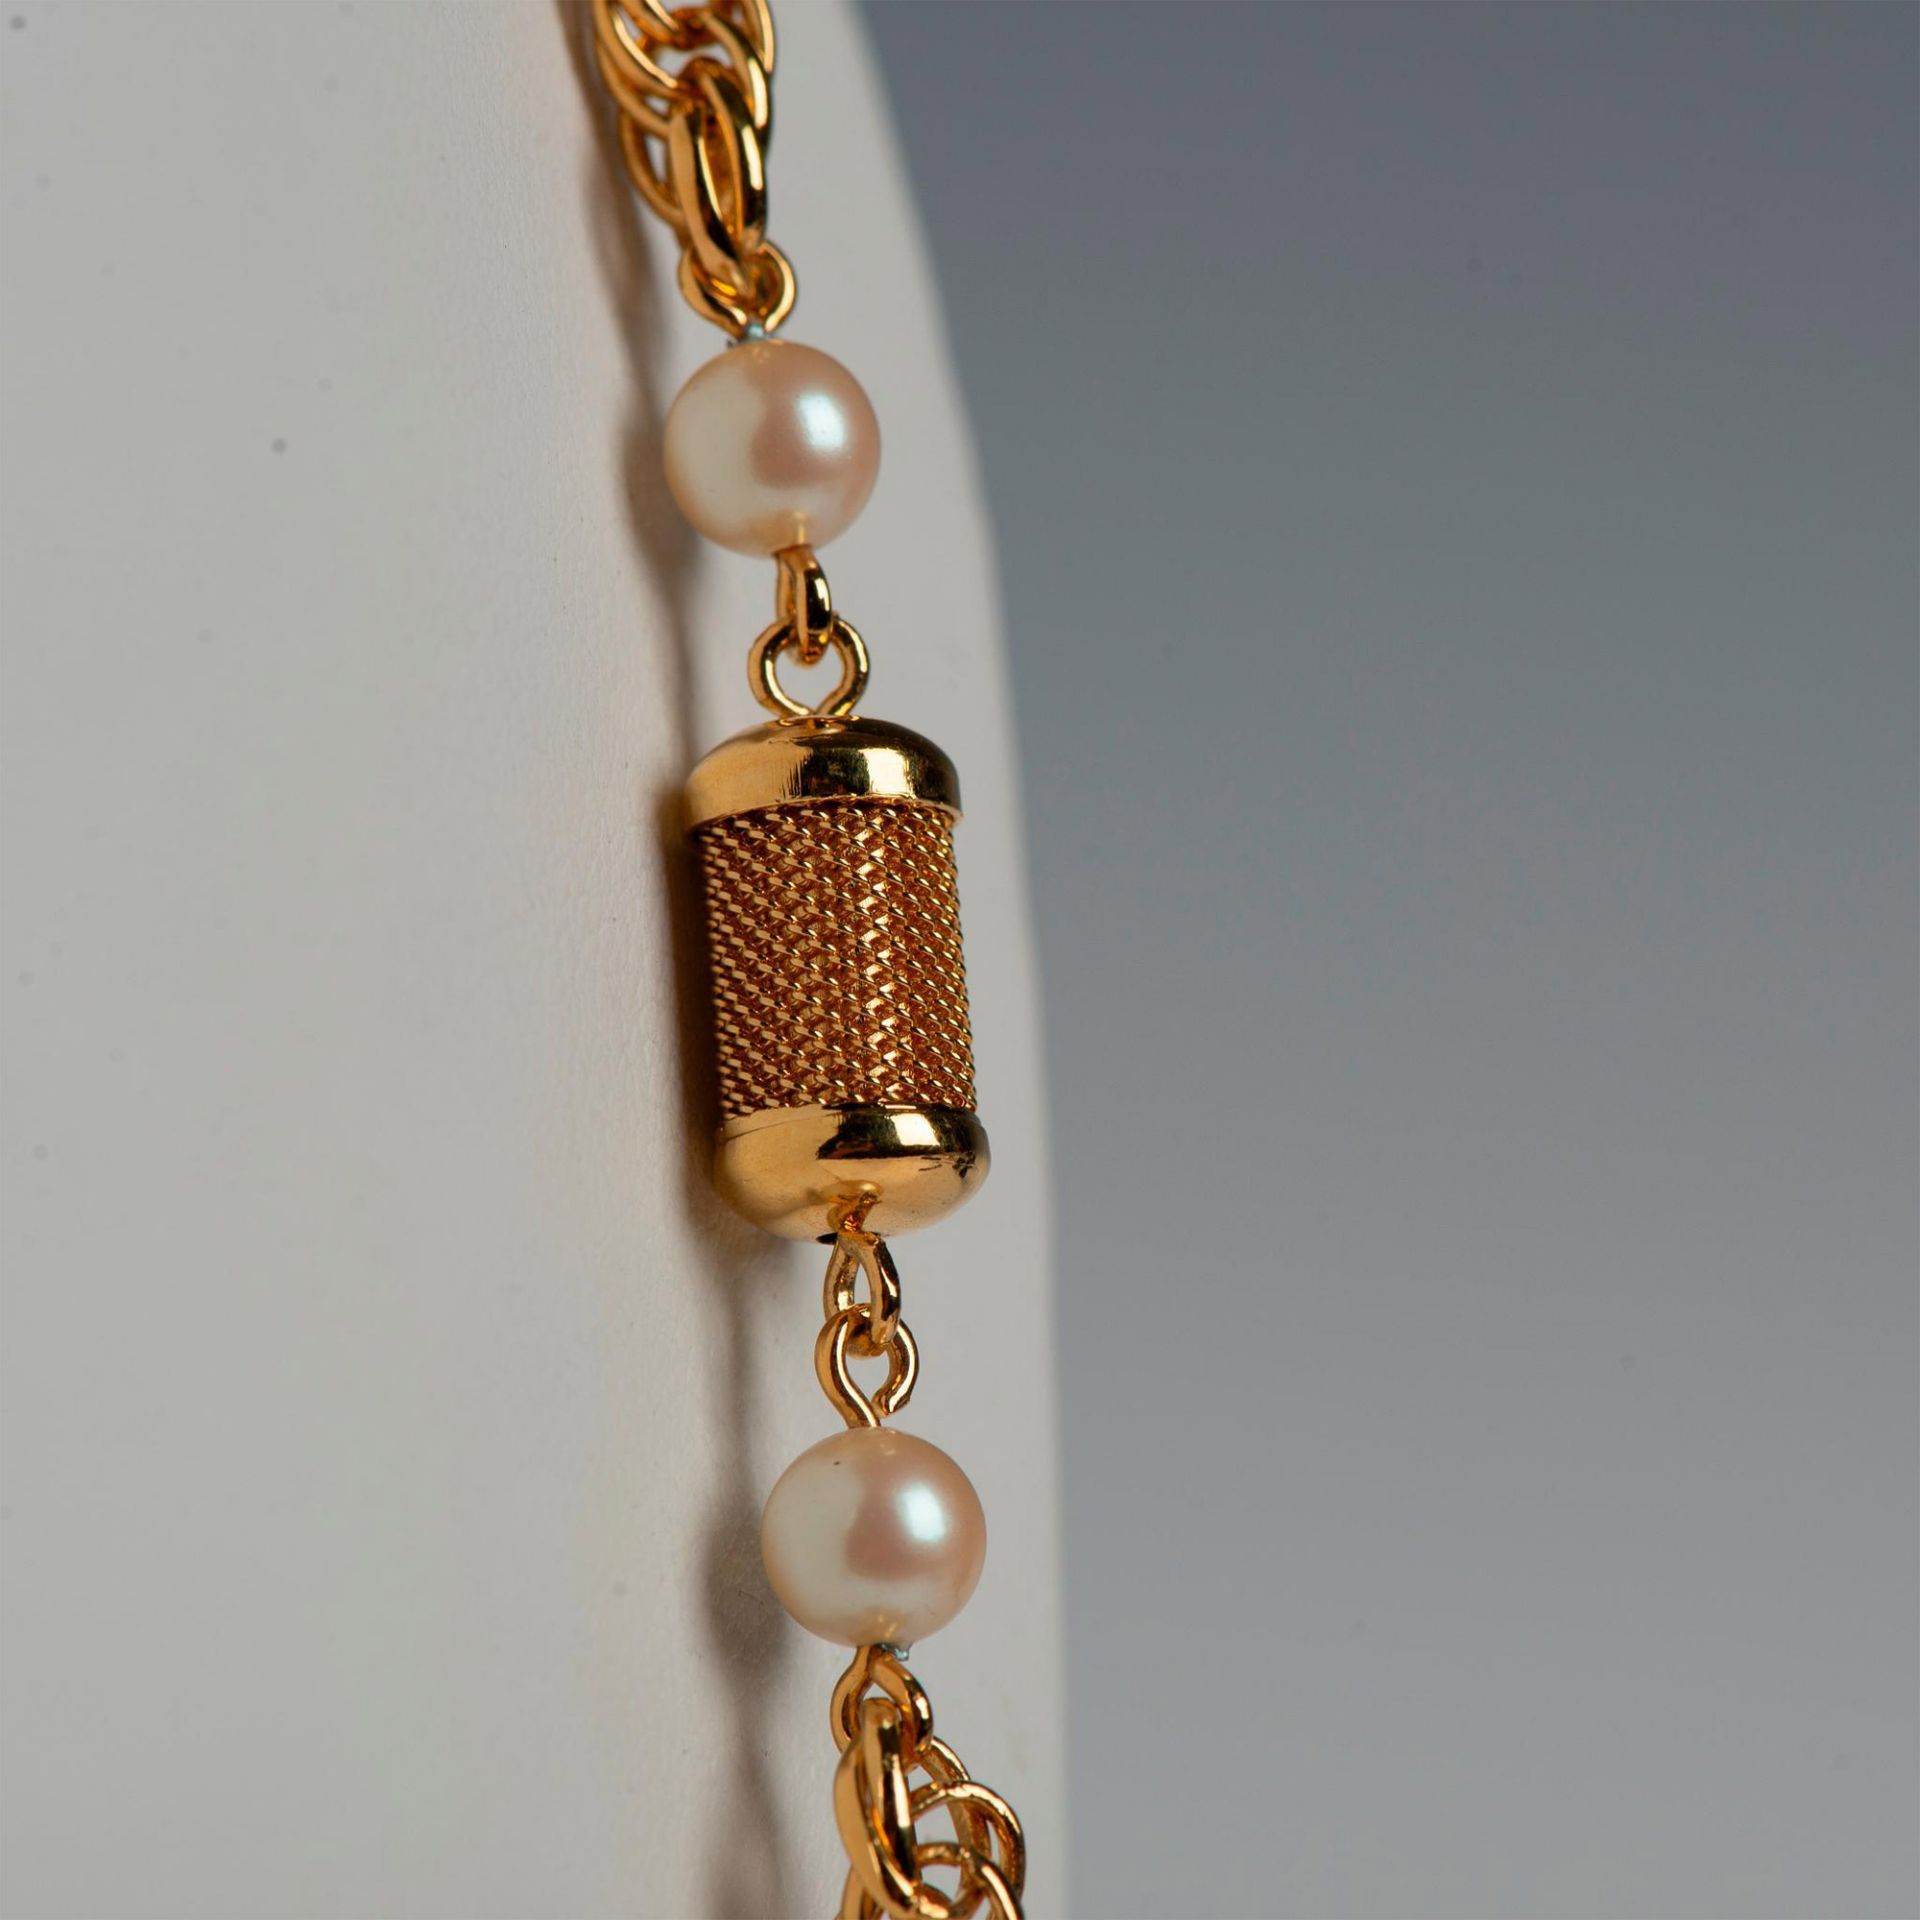 Vintage Monet Long Gold Metal and Faux Pearl Necklace - Image 3 of 6